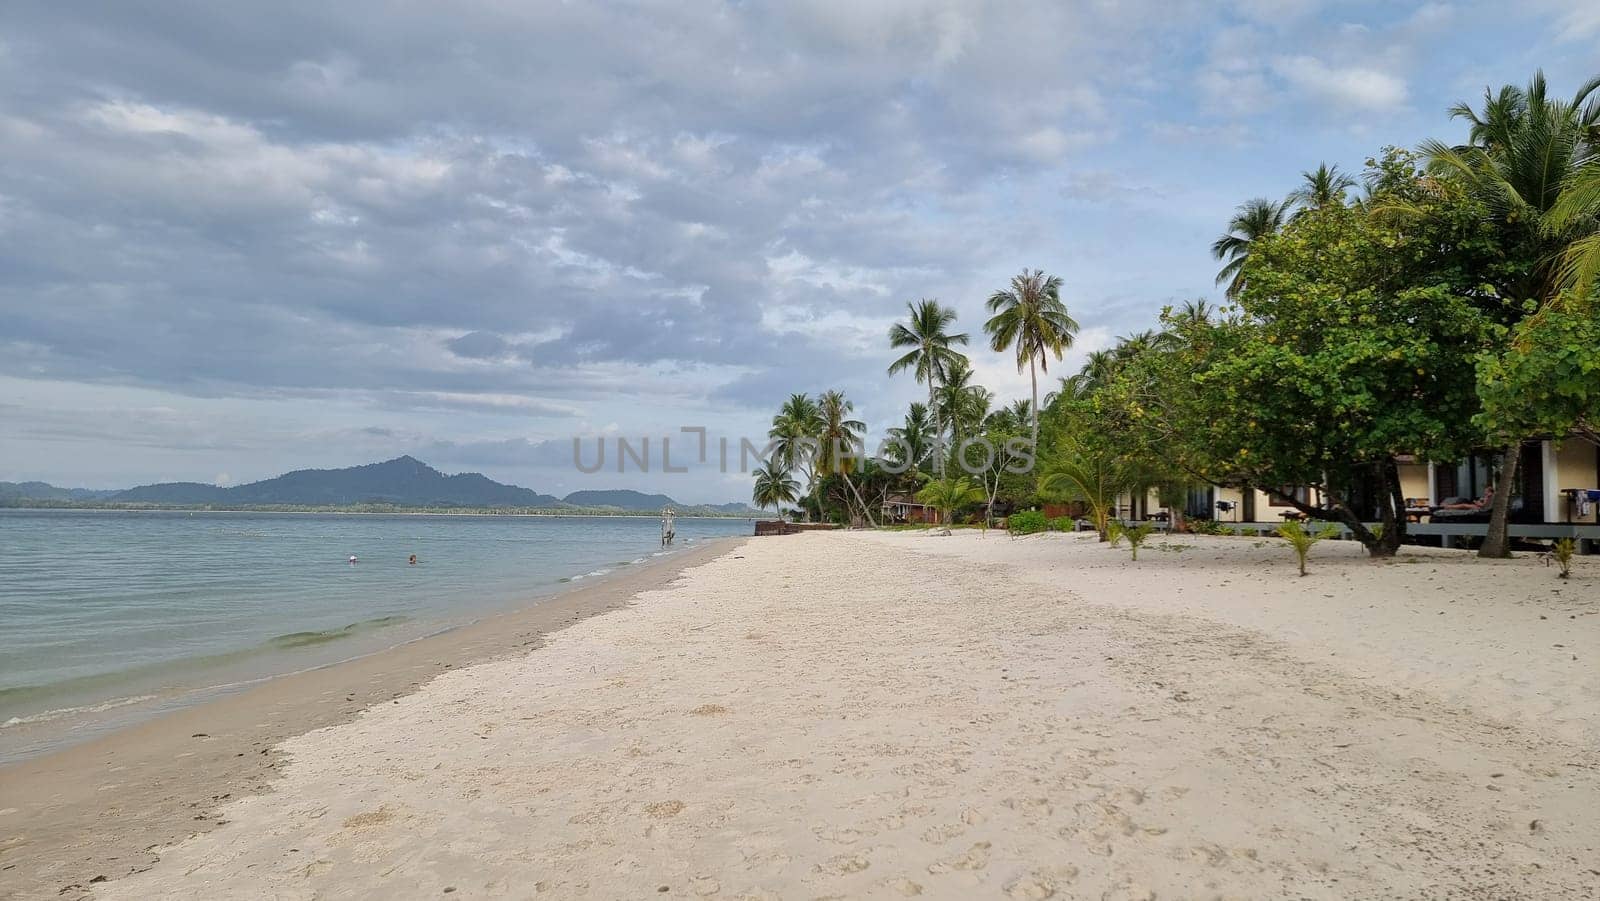 A tranquil sandy beach lined with swaying palm trees and picturesque houses along the shore, creating a peaceful and idyllic coastal scene. Koh Mook Thailand